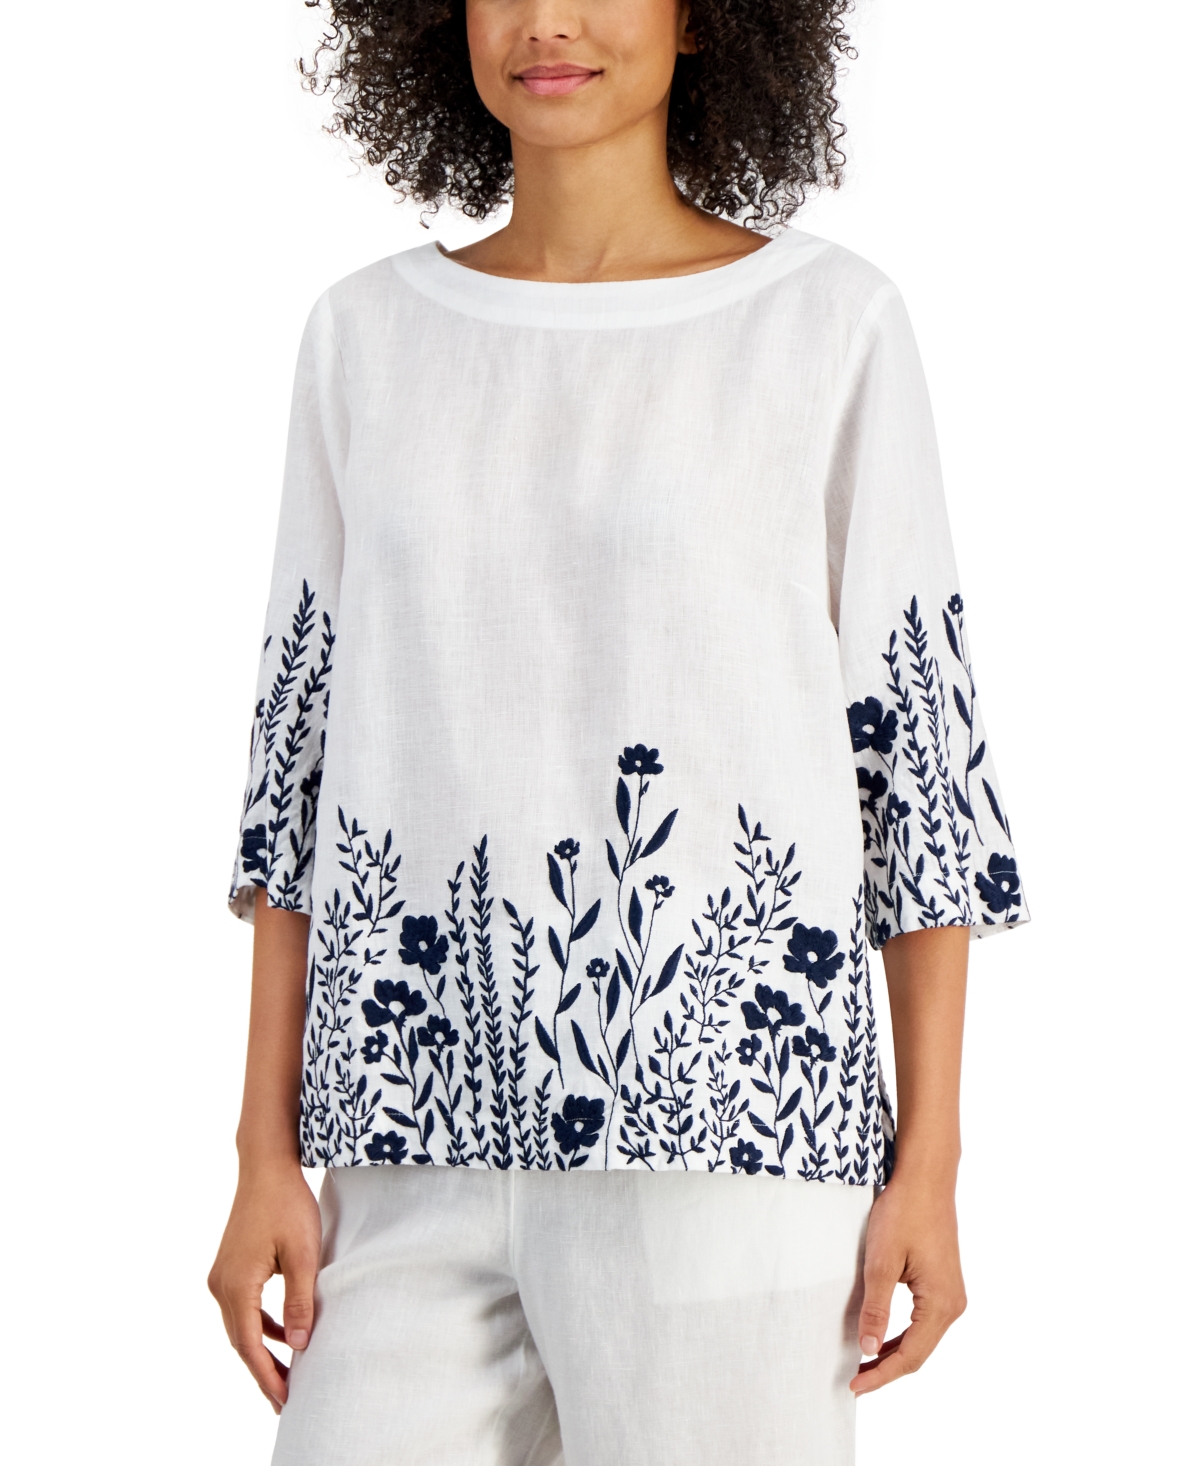 Women's 100% Linen Embroidered 3/4-Sleeve Top, Created for Macy's - Bright White Combo